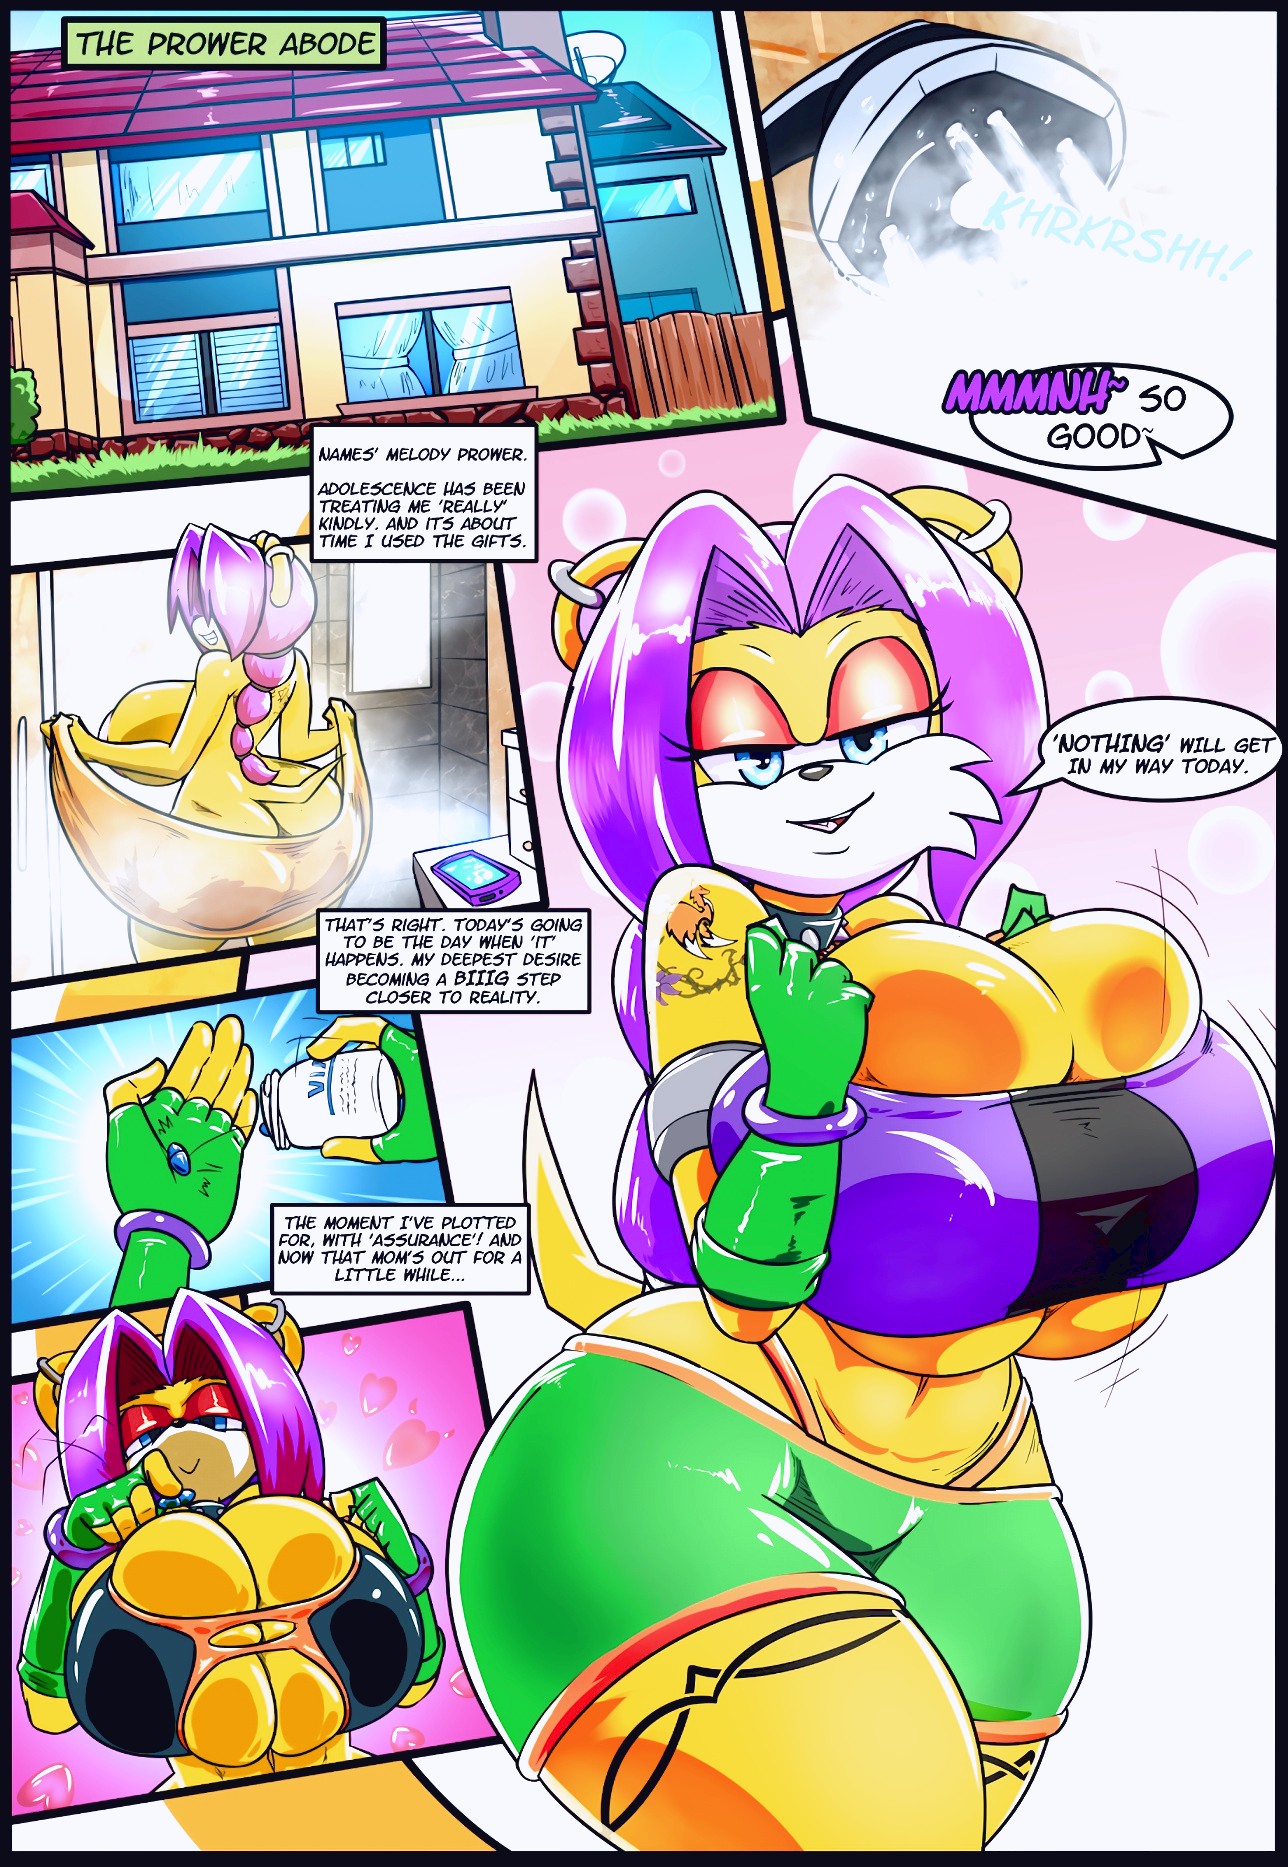 Family Bonding porn comic page 01 on category Sonic The Hedgehog